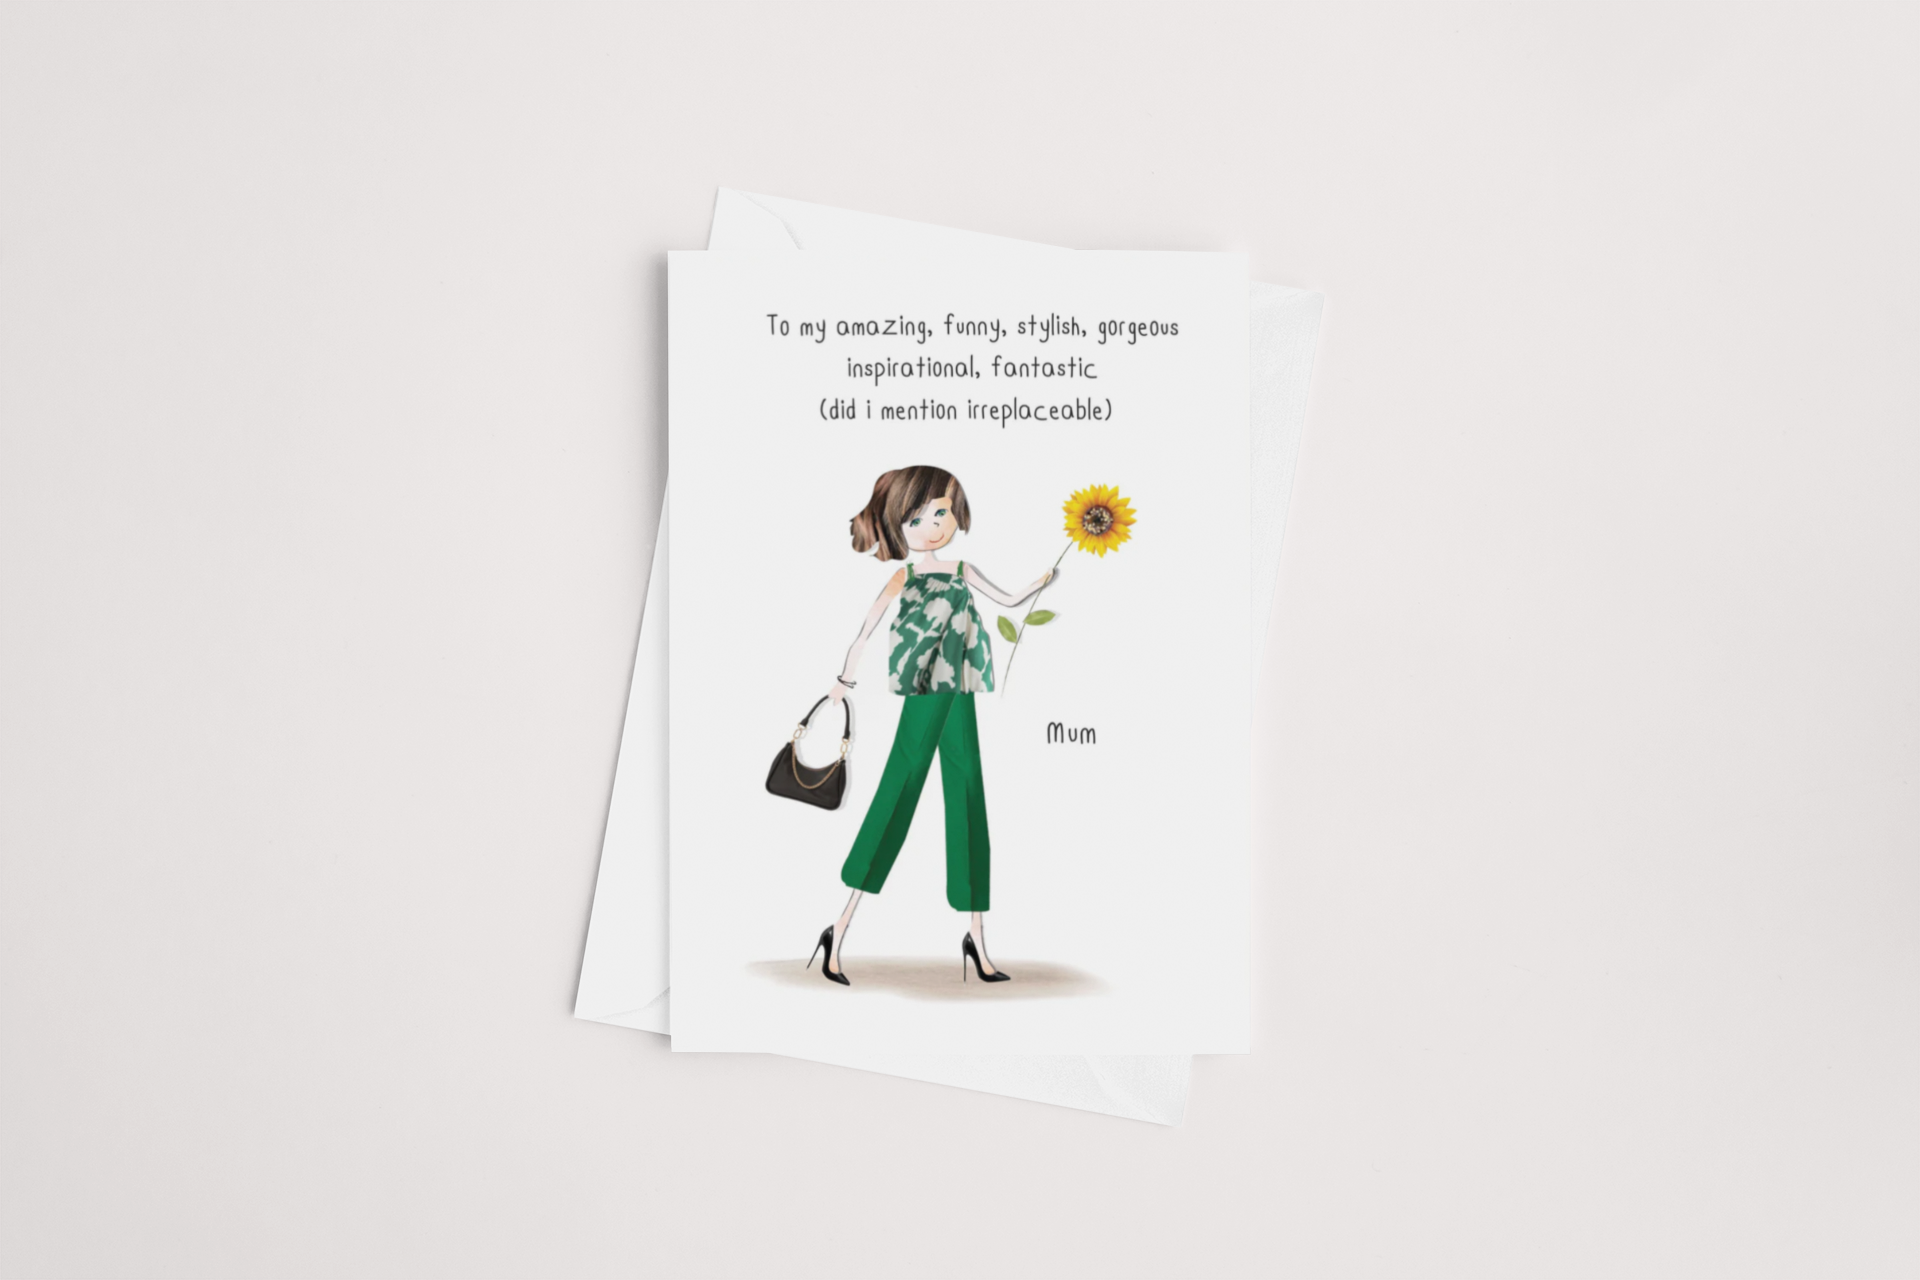 A Irreplaceable Mum Mother's Day Card from icandy on a plain background featuring an illustrated woman holding a sunflower and a handbag, with a text saying "to an amazing, funny, stylish, gorgeous, inspirational.